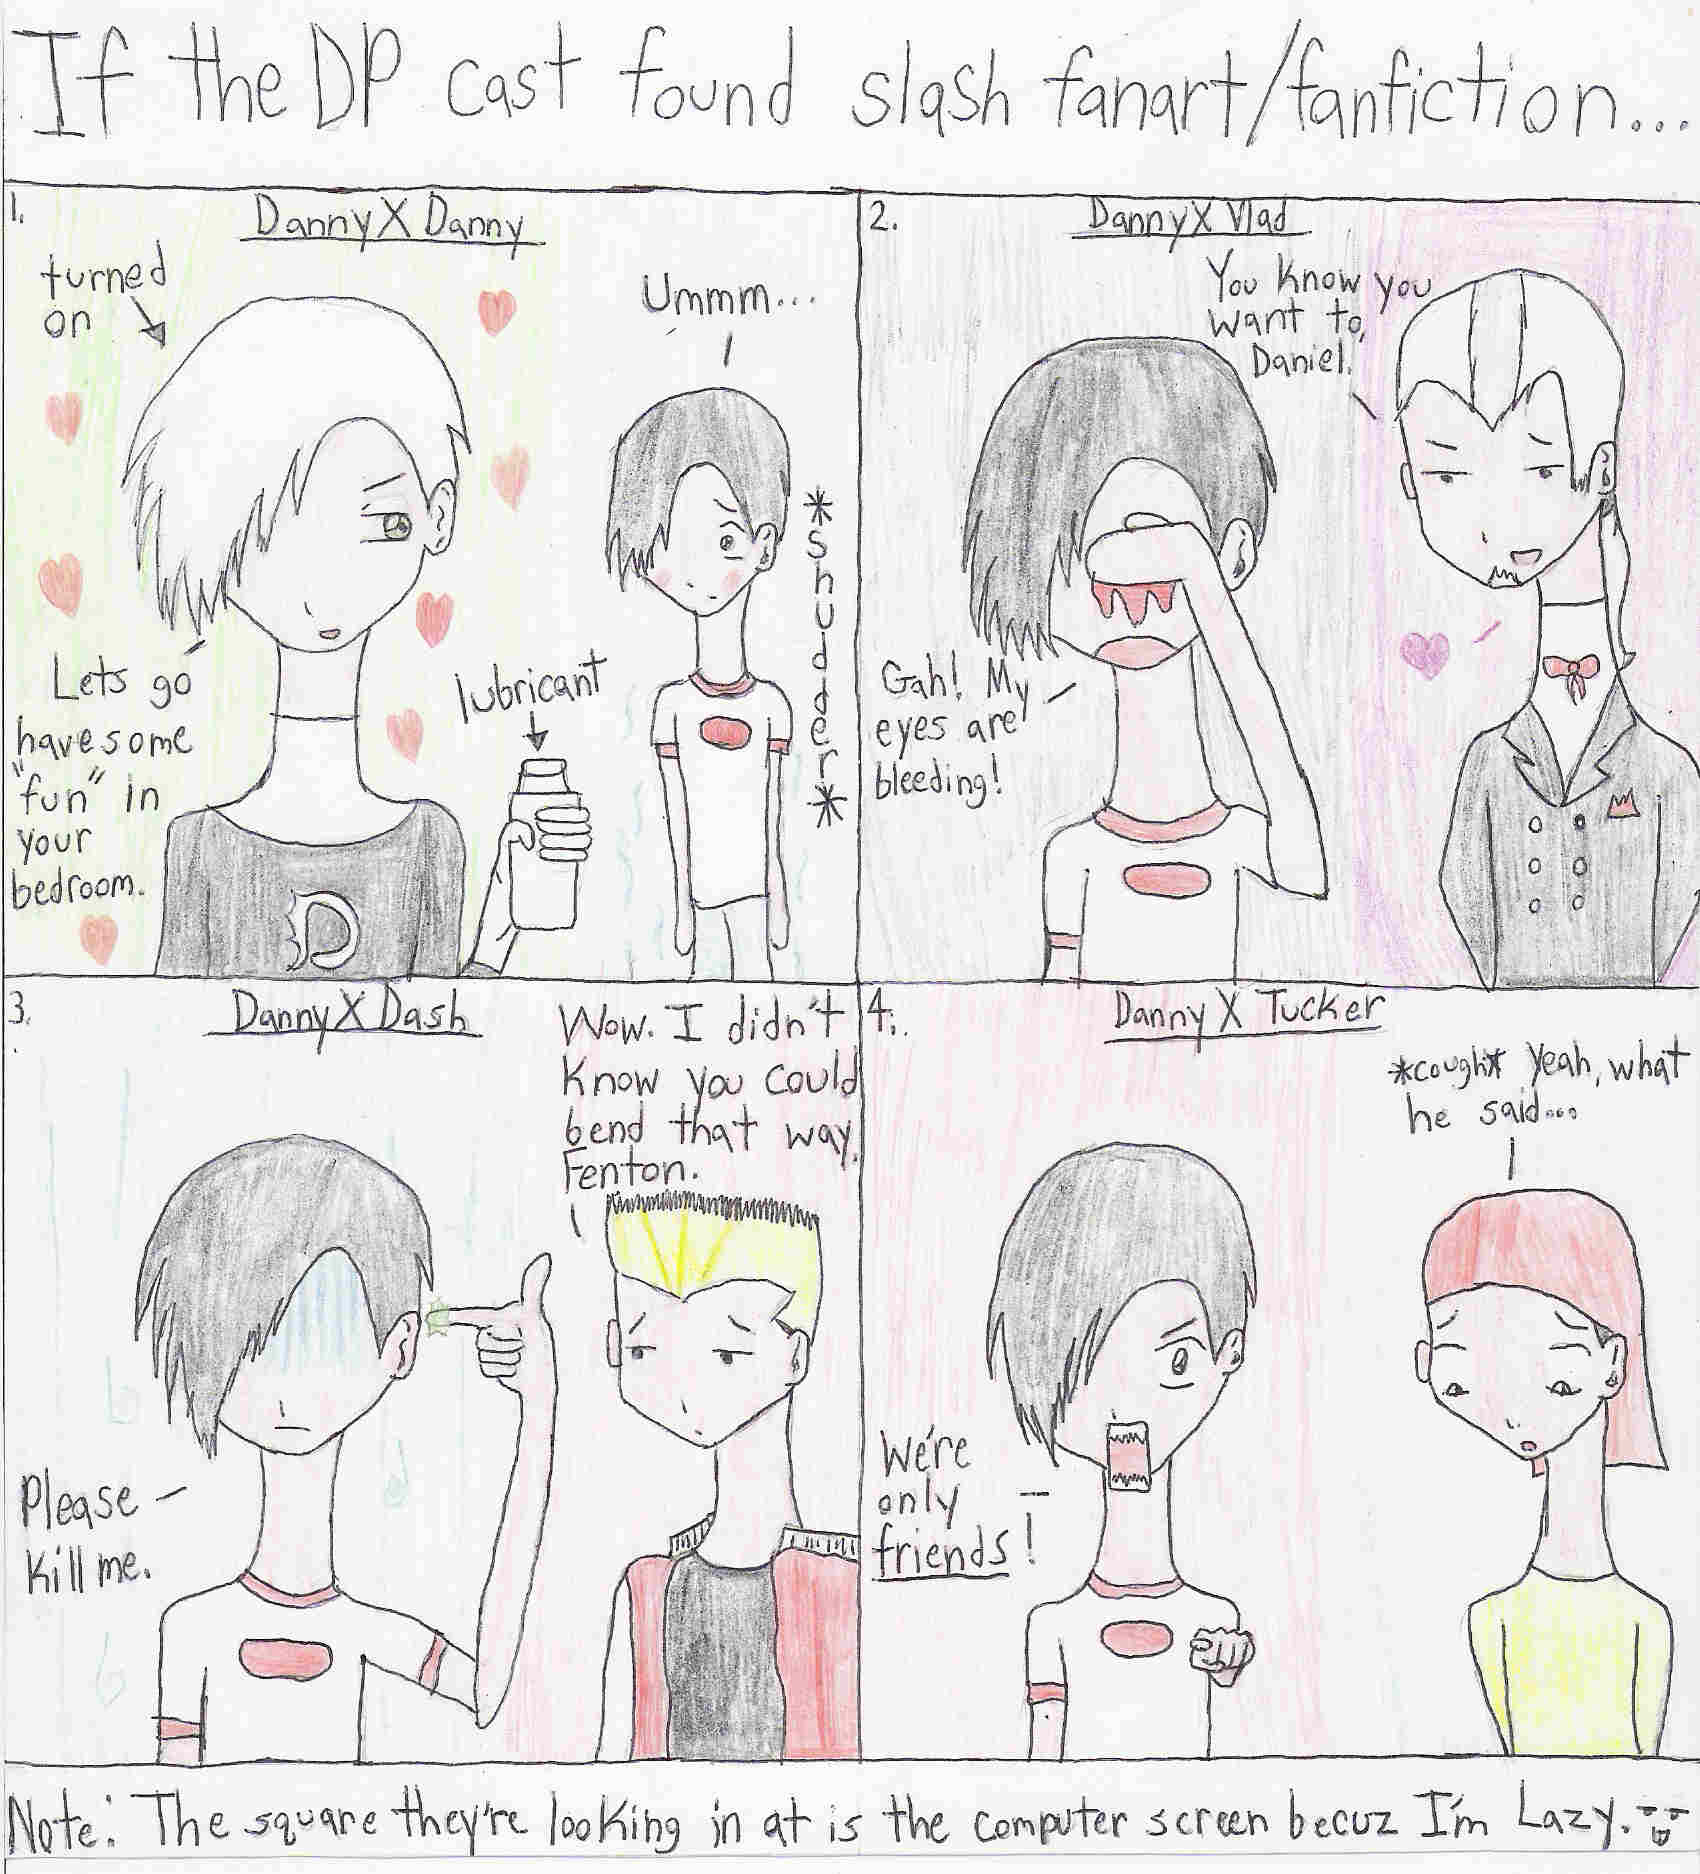 "If the DP cast found slash fanart/fanfiction" by Hieis_lover_and_obsessor